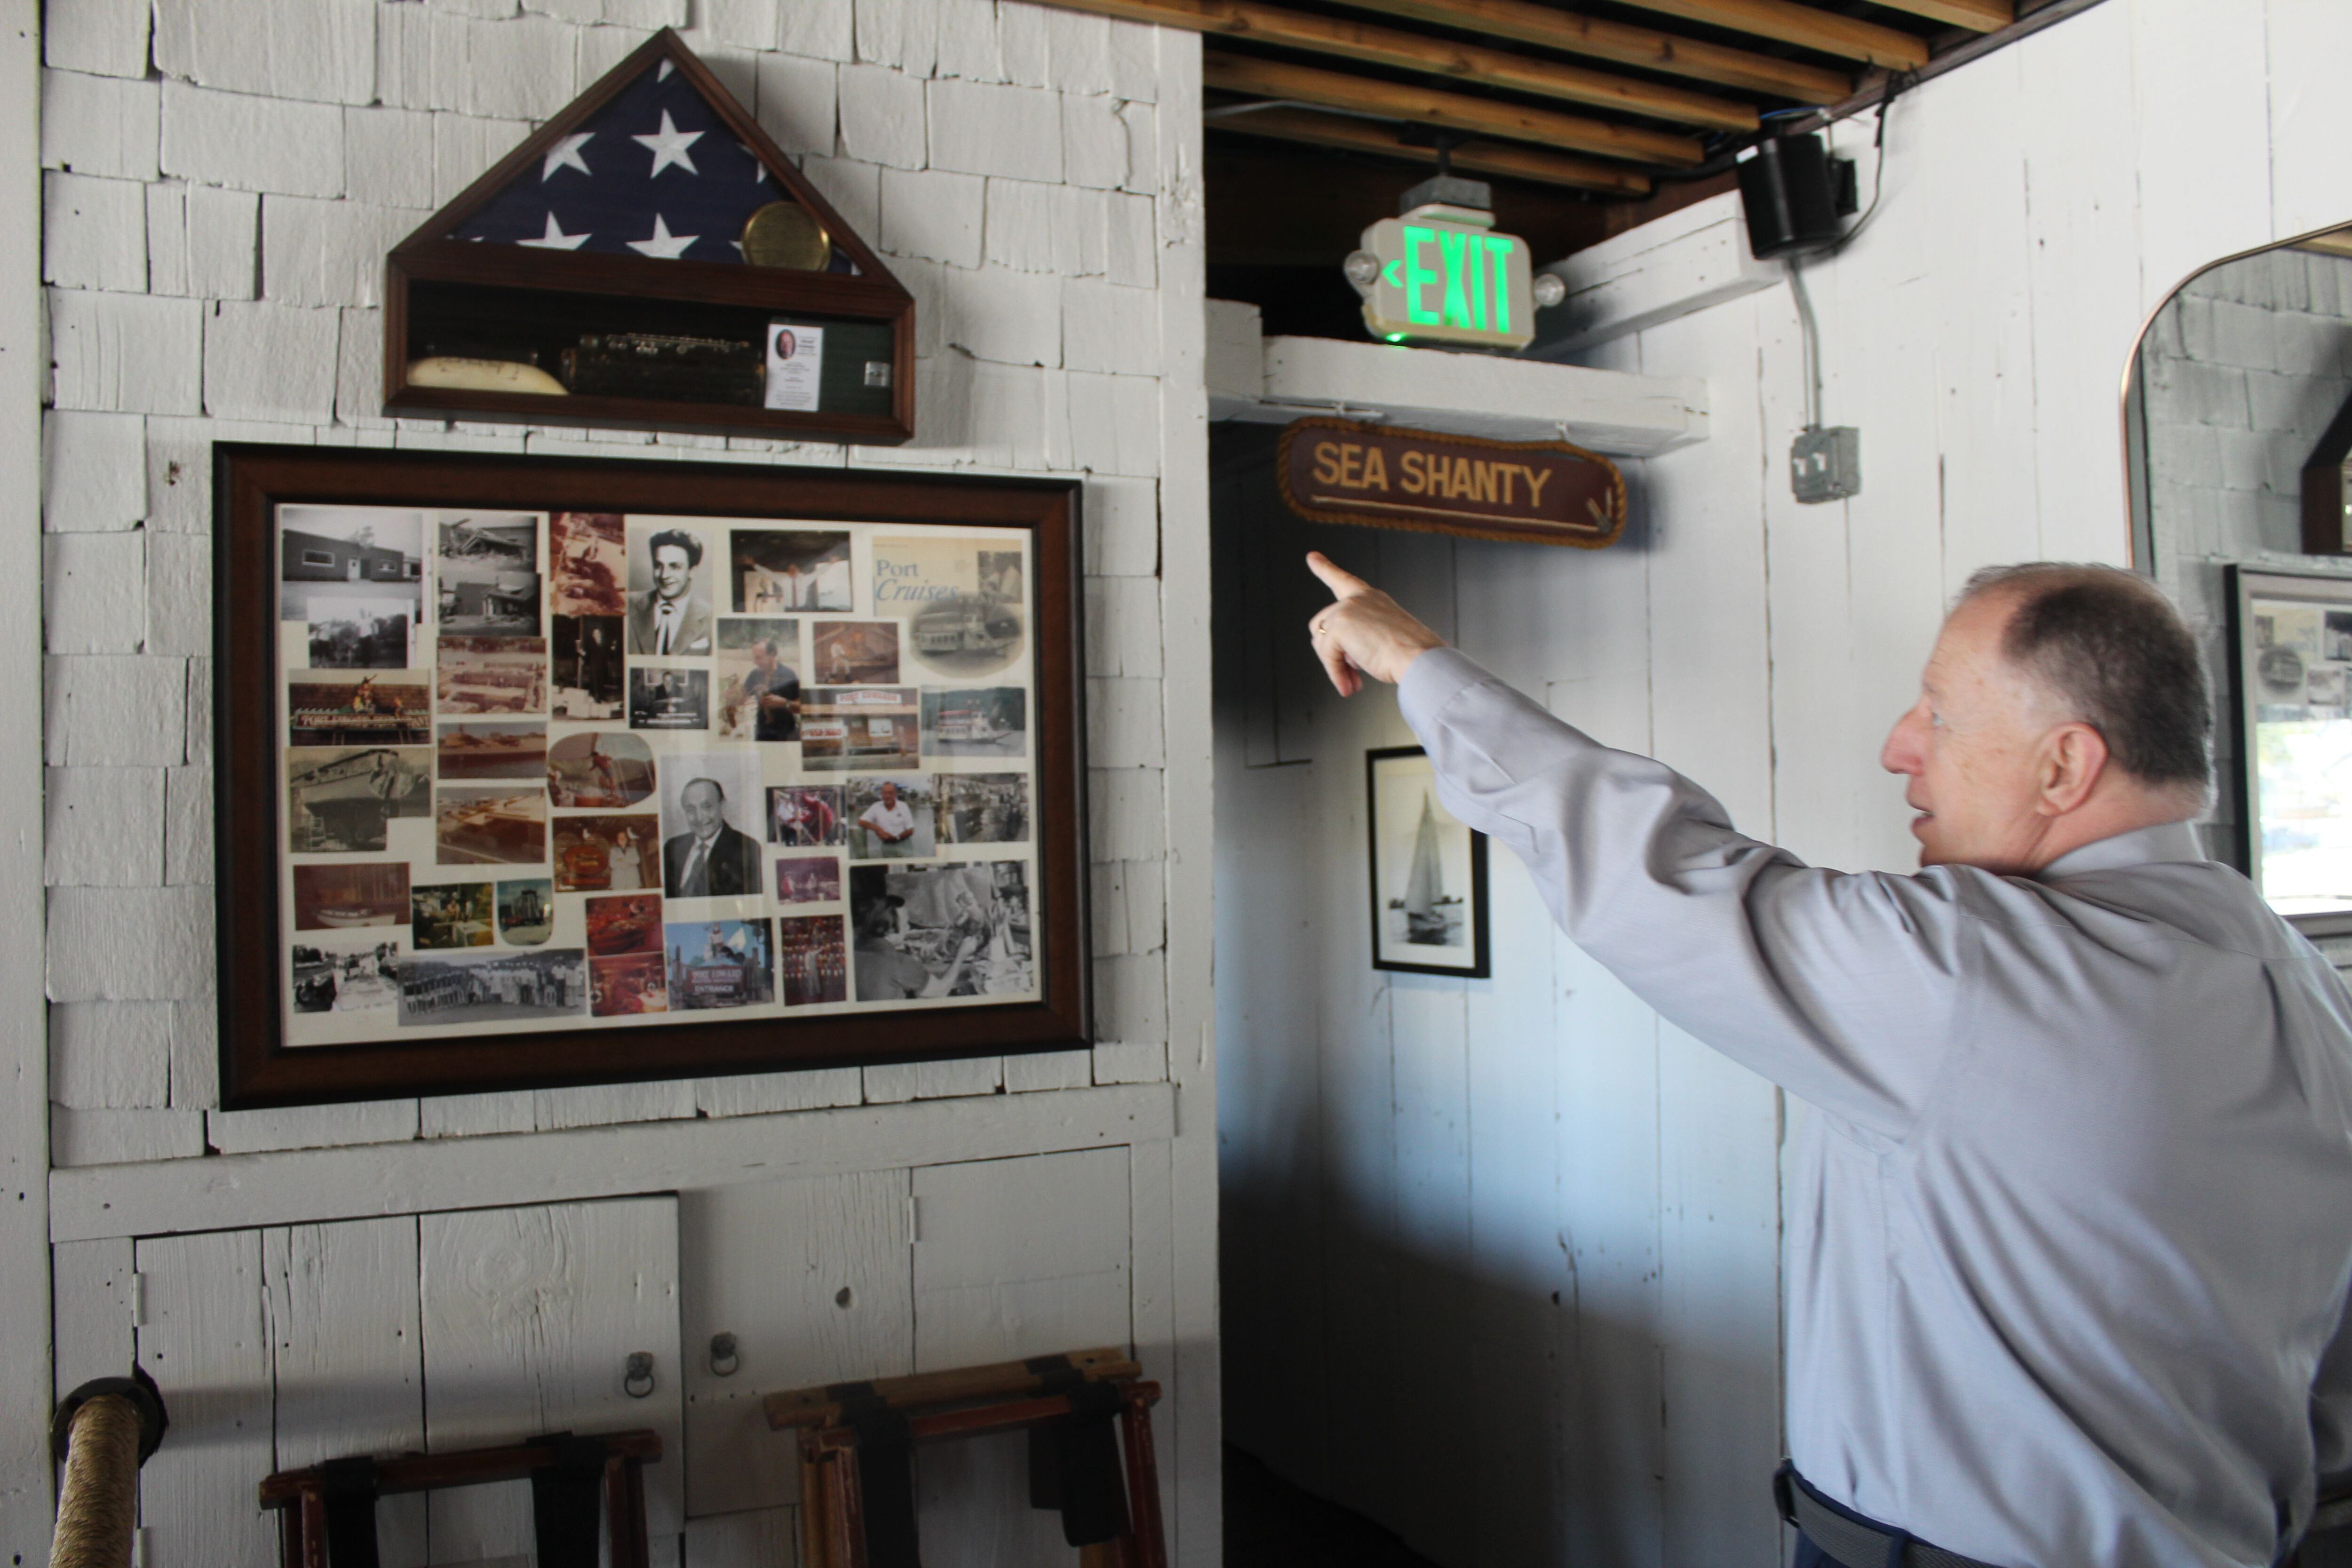 Port Edward owner Ziya Senturk shows off pictures and history of late founder Ed Wolowiec.